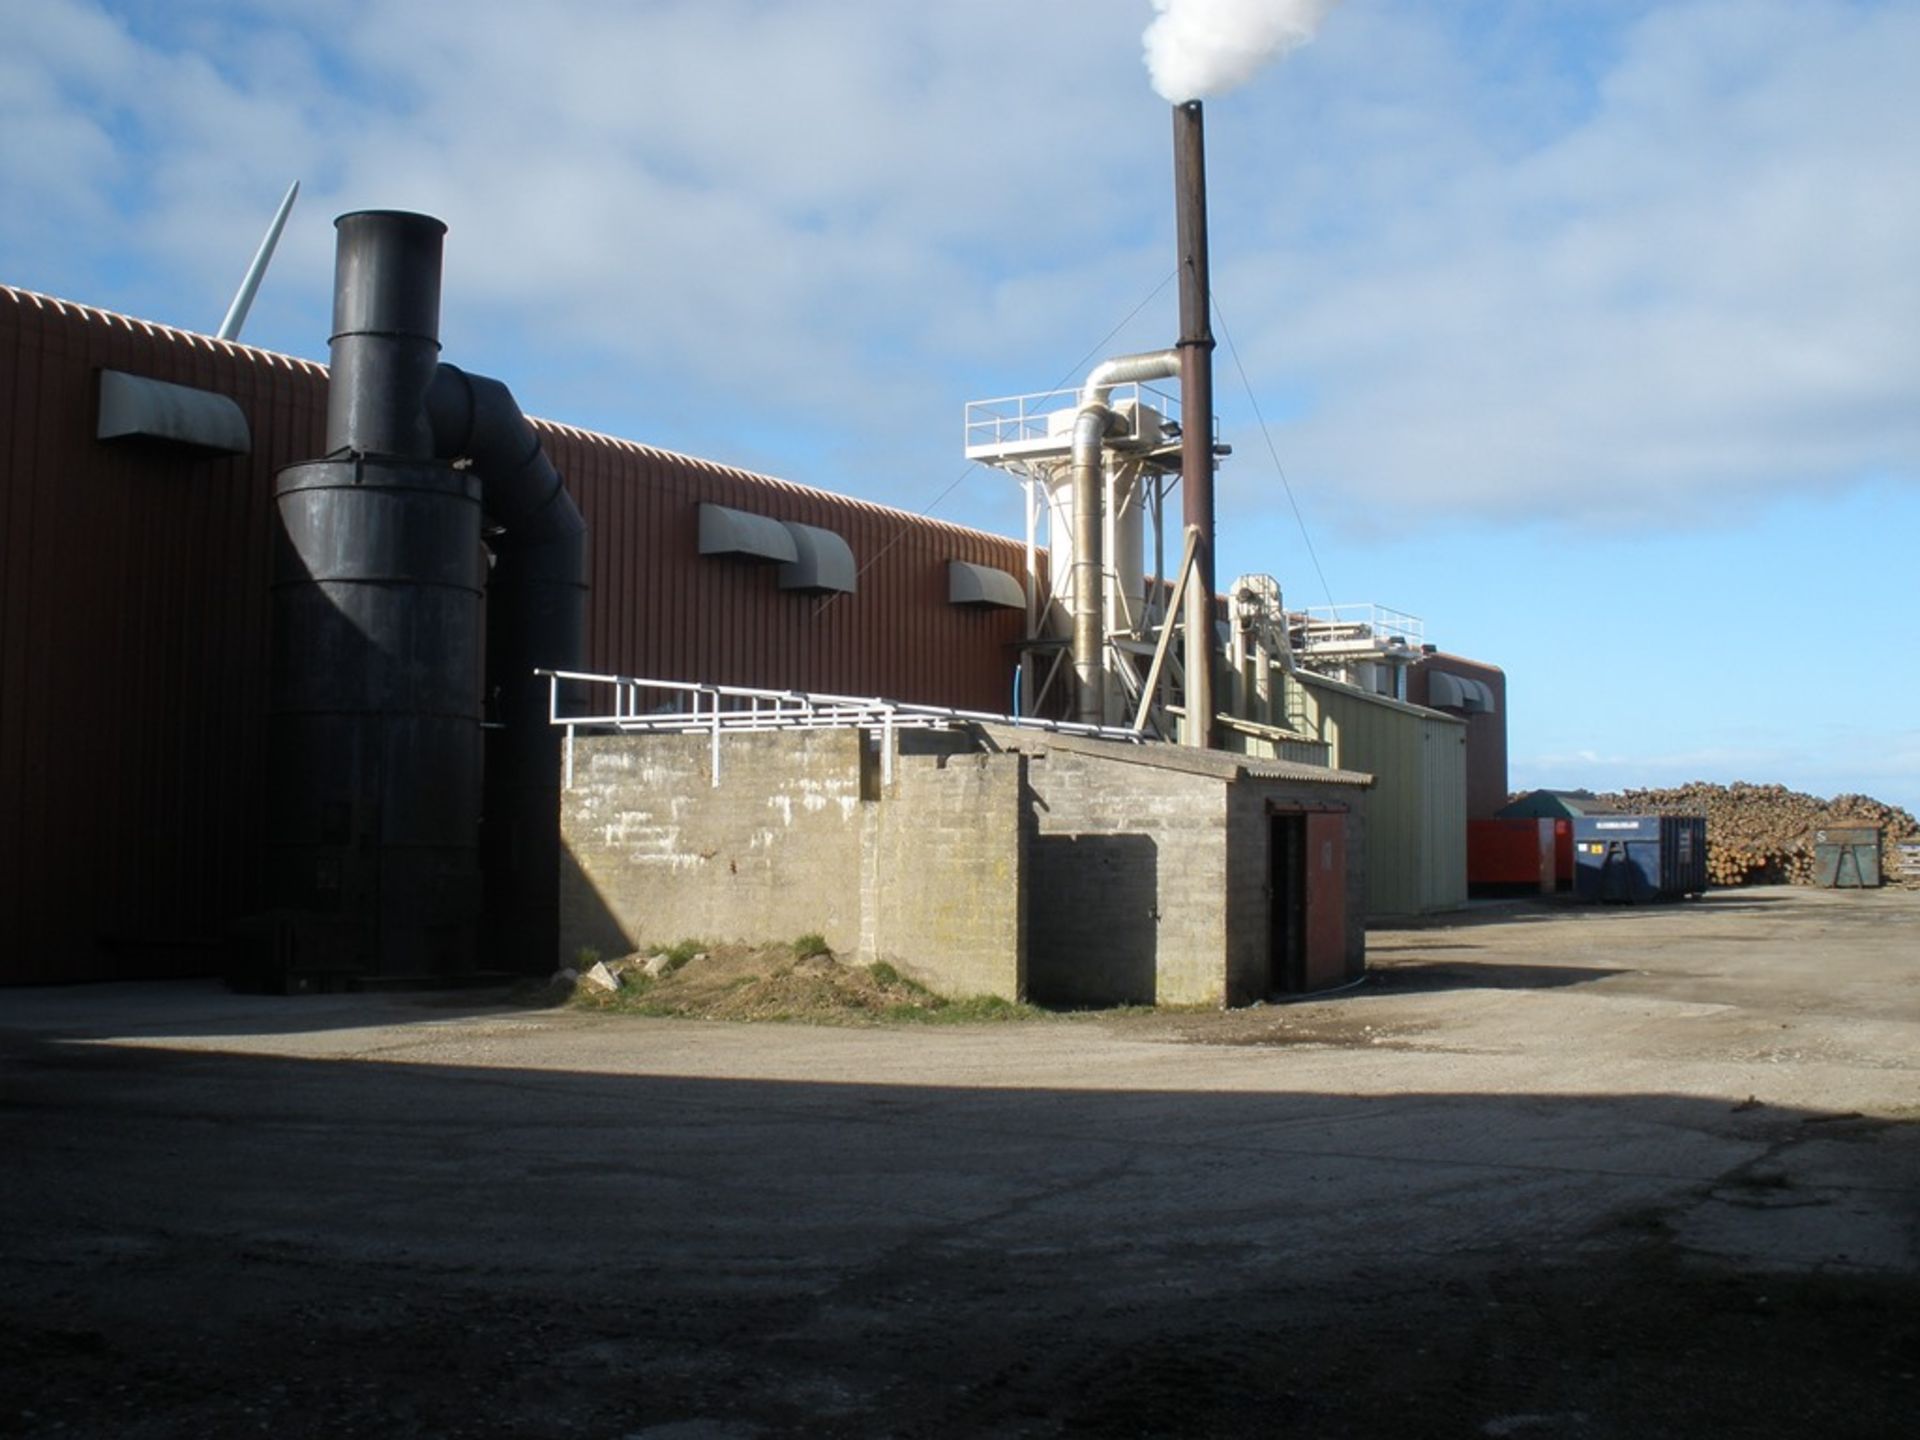 Furnace - Energy Unlimited Biomass Burner, believed built in 2008. It has an output of 5MW - Bild 5 aus 5